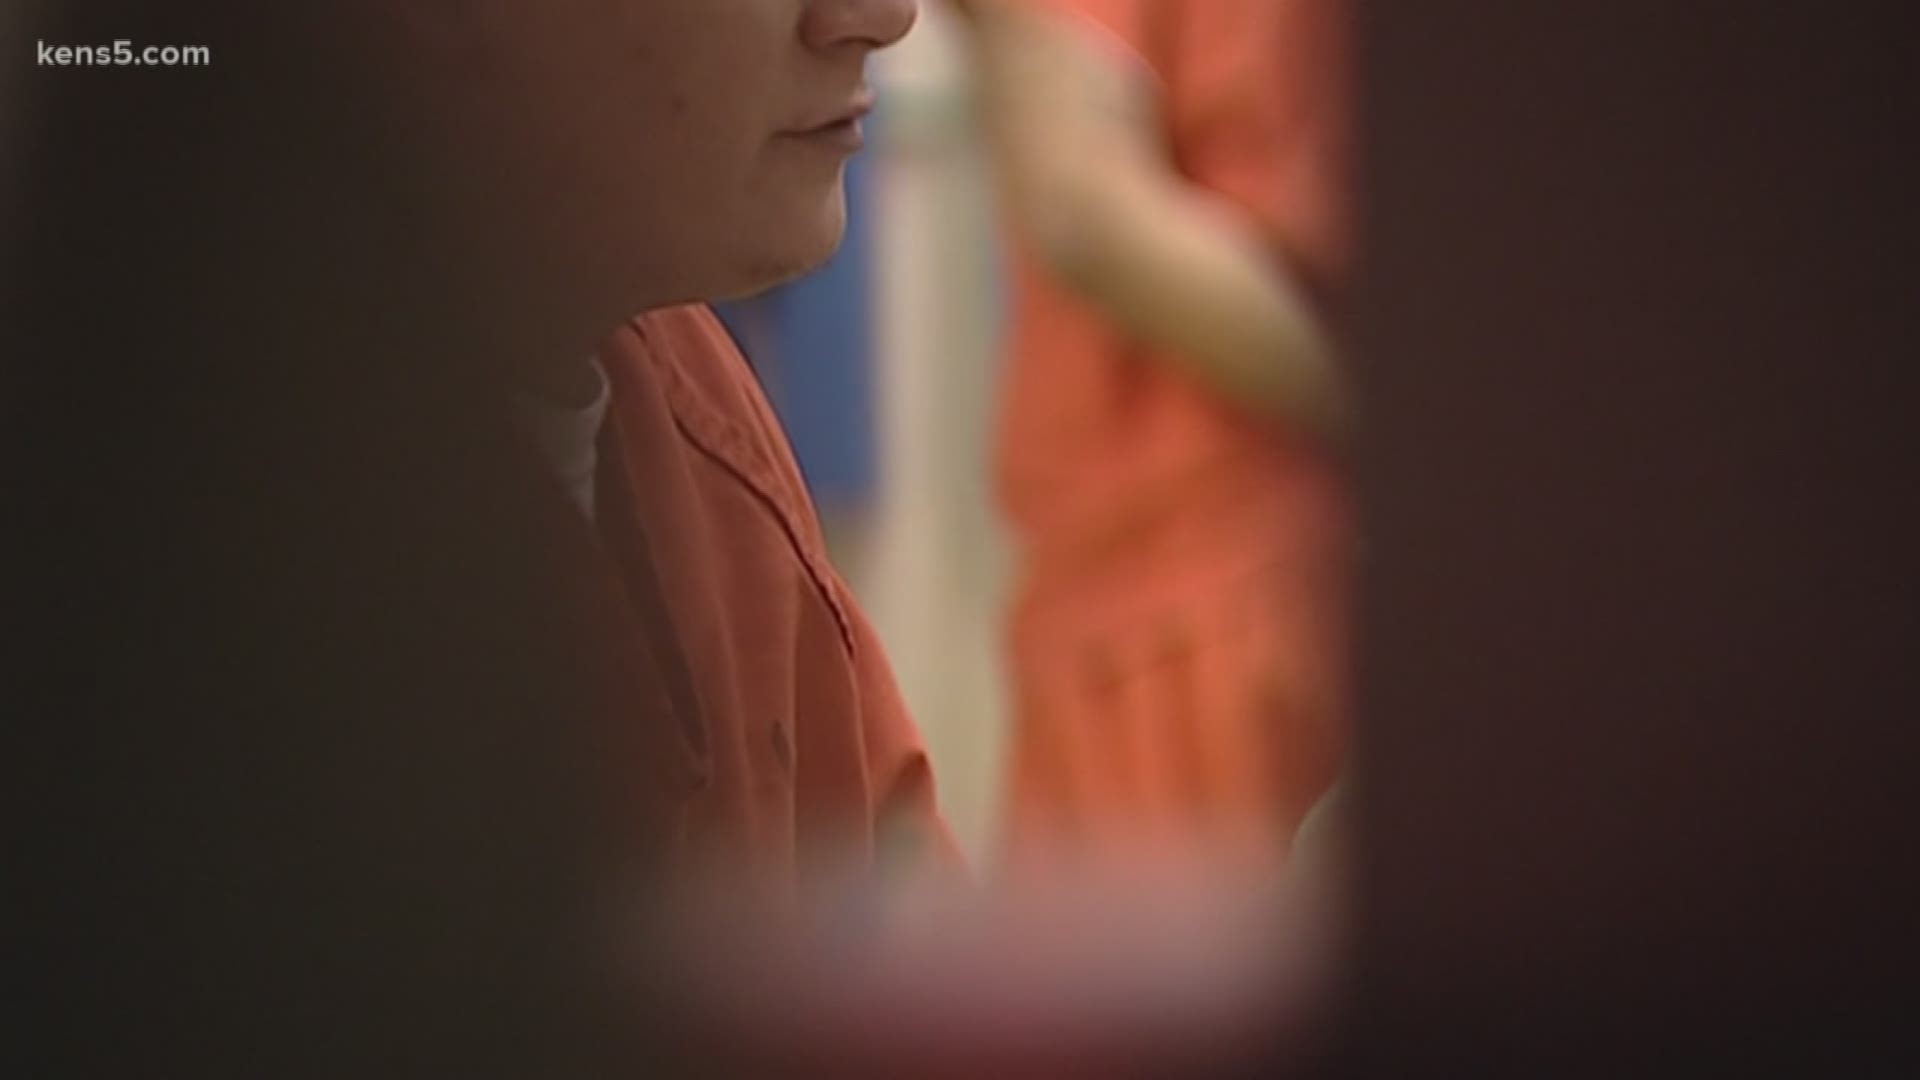 The Bexar County Public Defender's Office is looking to make sure DV suspects with mental health issues get the treatment they need after arrest.